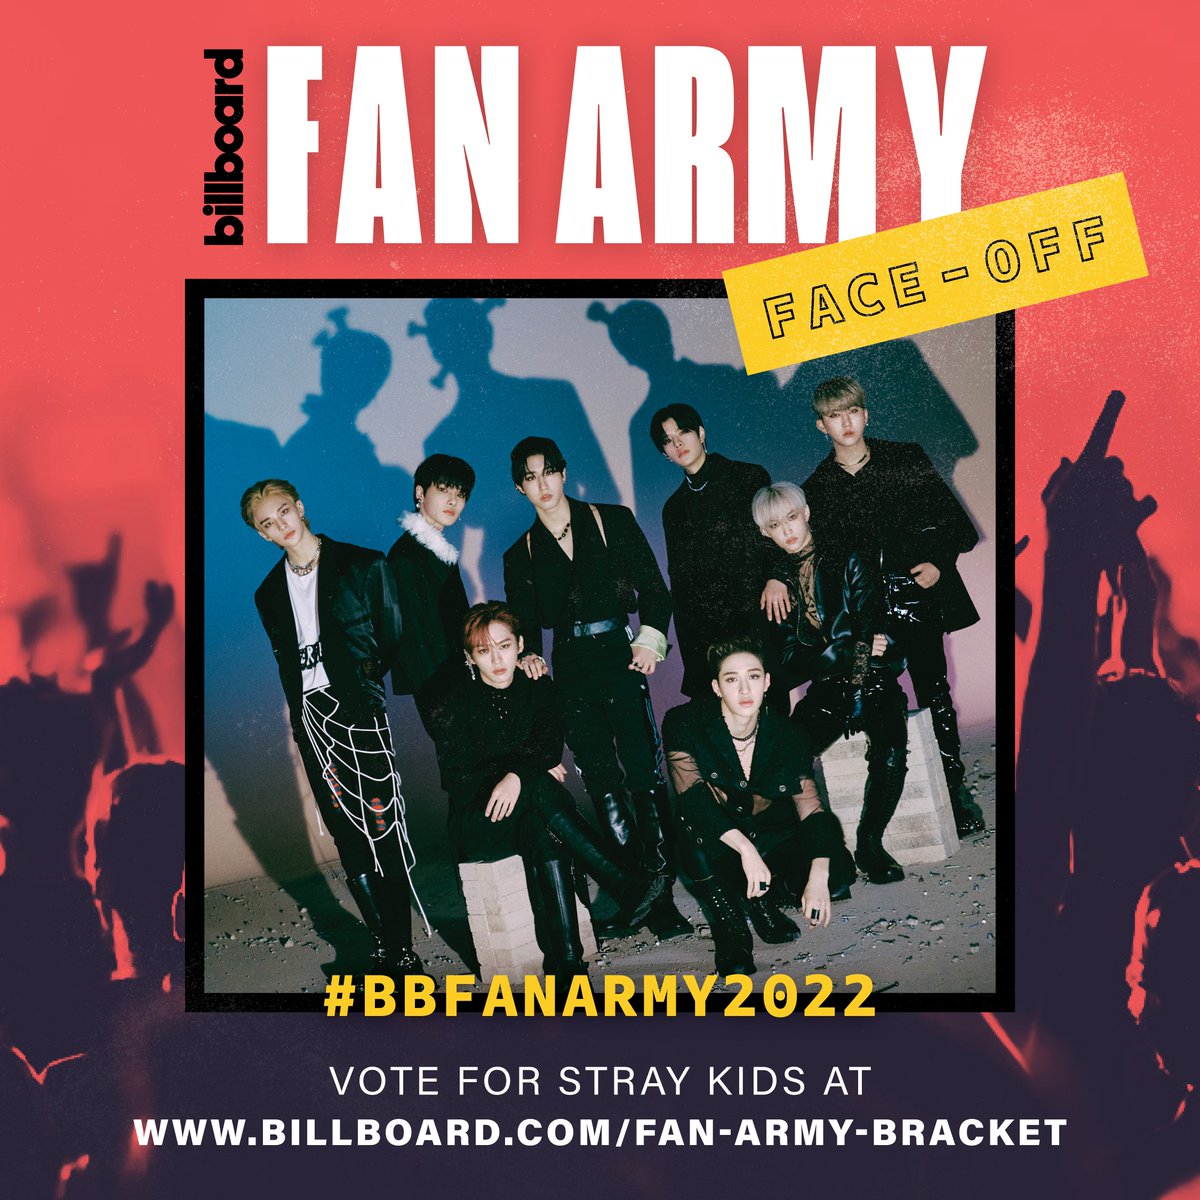 Attention #STAY! 🚨 Don’t miss your chance to vote for @Stray_Kids in Round 4 of #BBFanArmy2022! blbrd.cm/mK9lquP